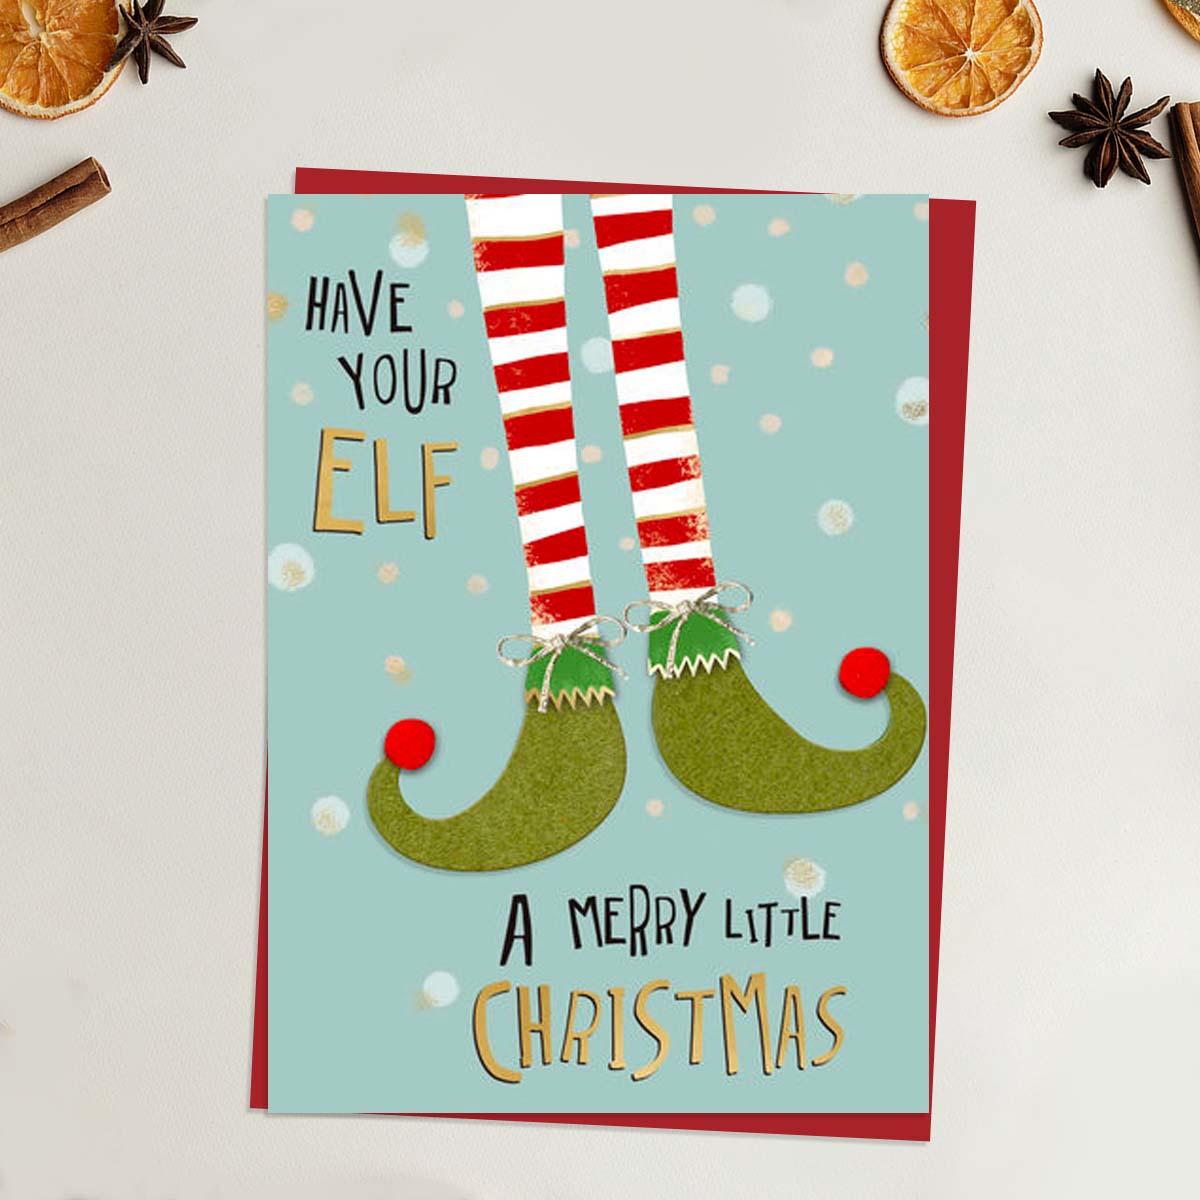 Have Your Elf A Merry Little Christmas Card Front Image